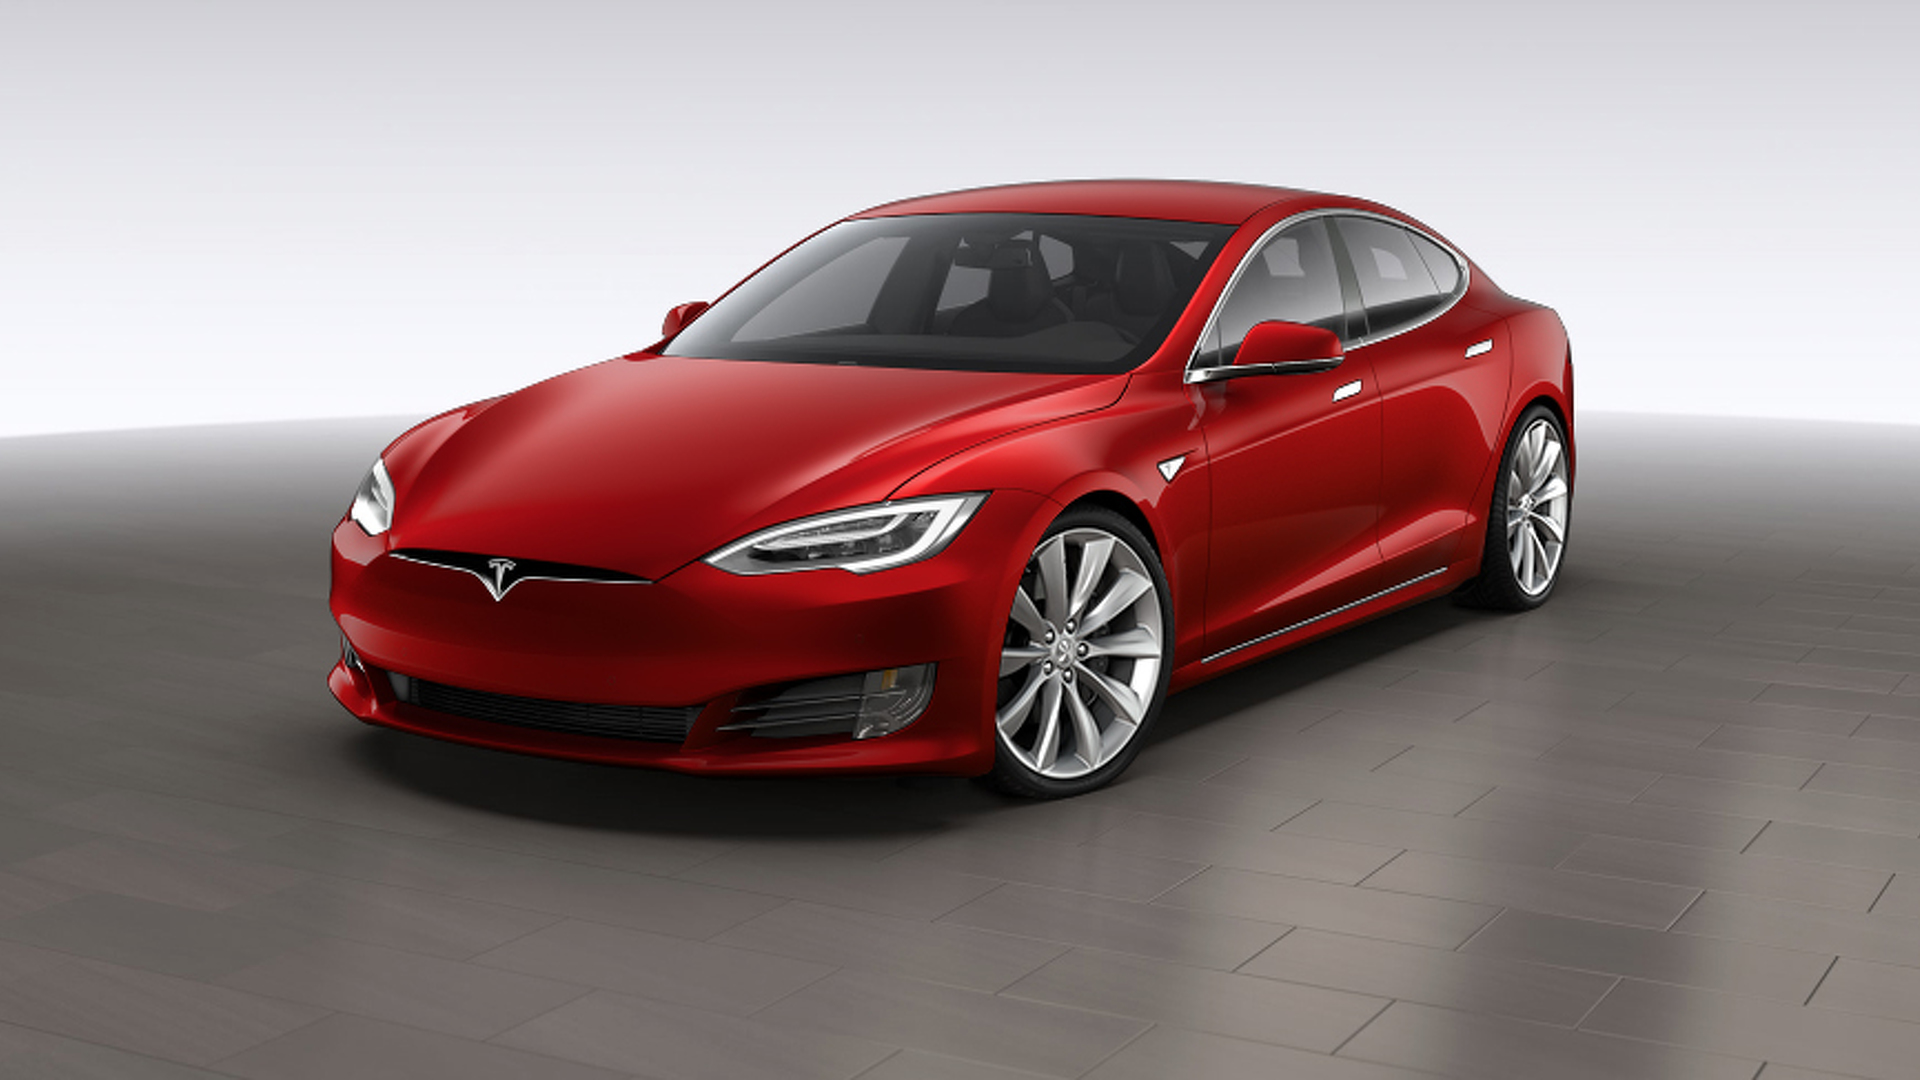 Tesla Model S P100D is the quickest new car you can buy today